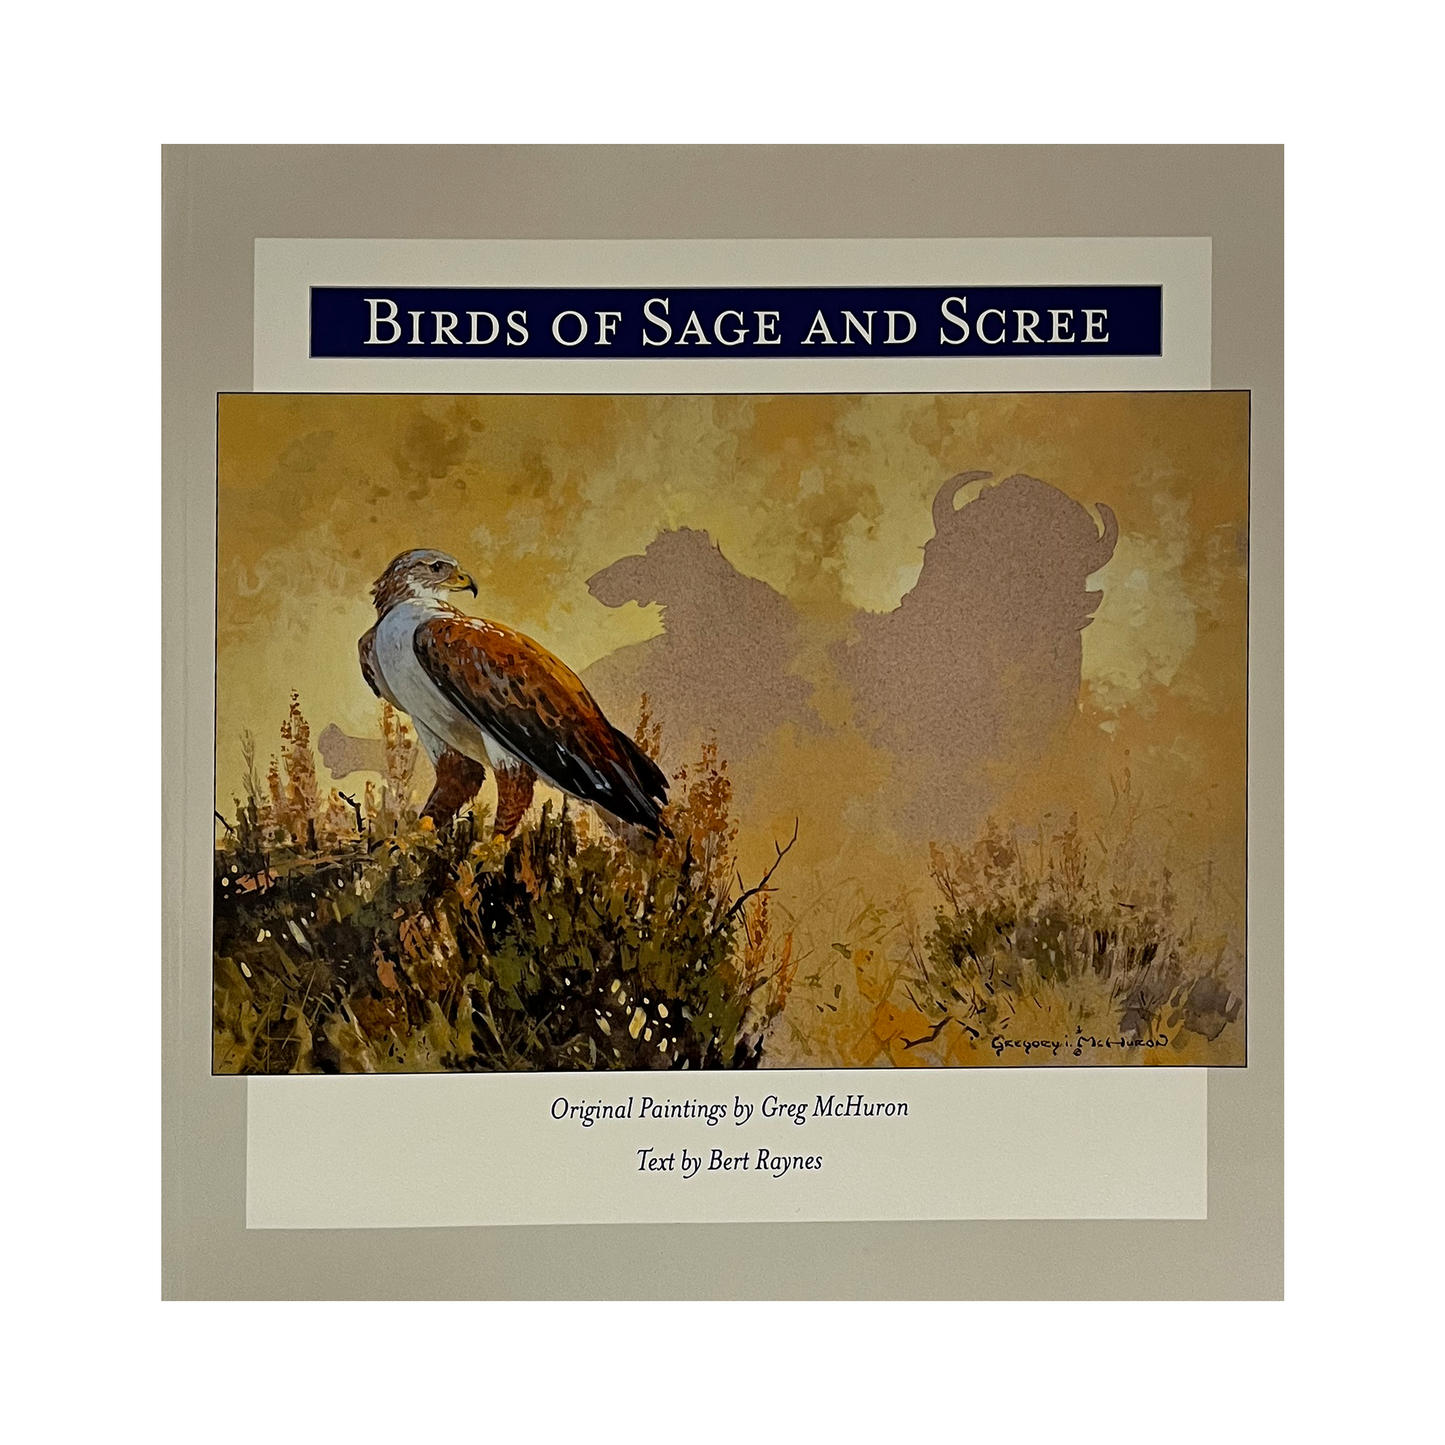 Birds of Sage and Scree